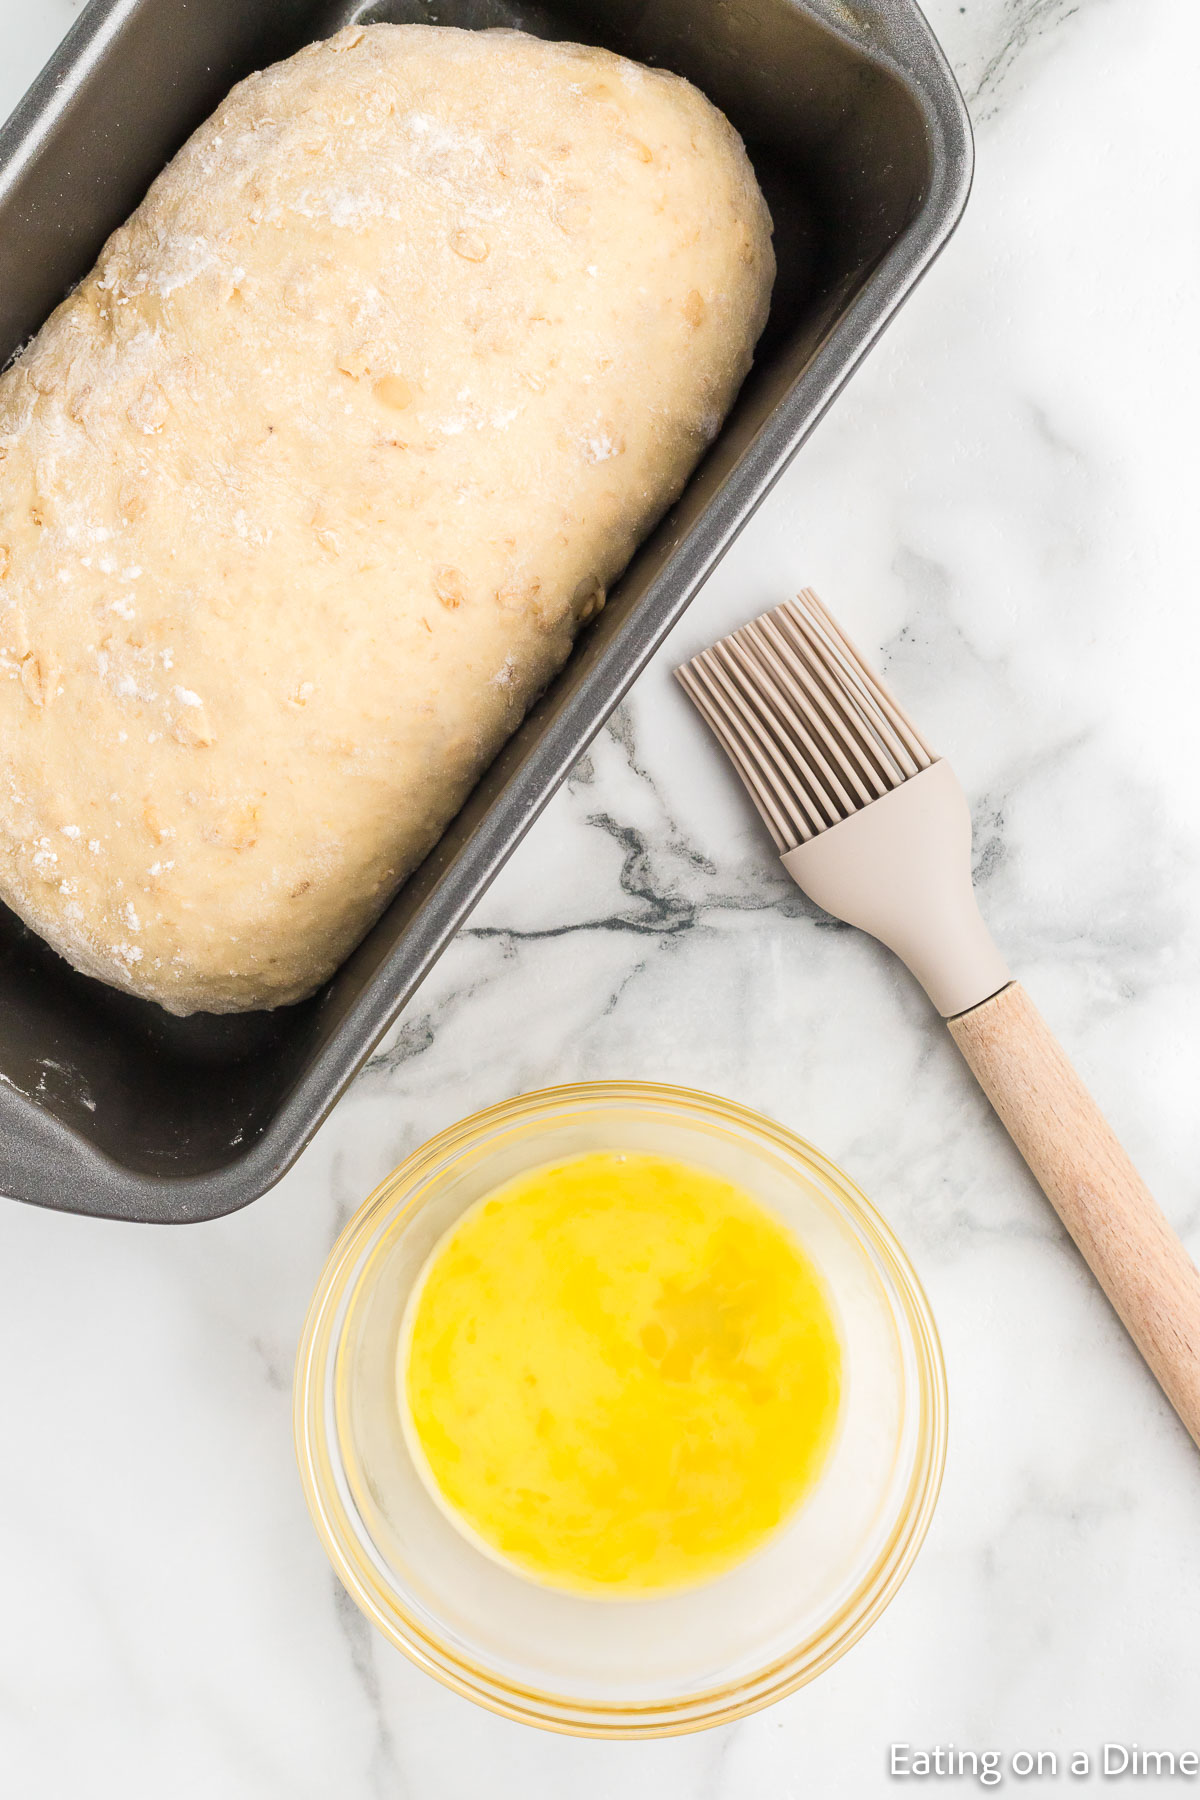 Topping the dough loaf in the pan with melted butter